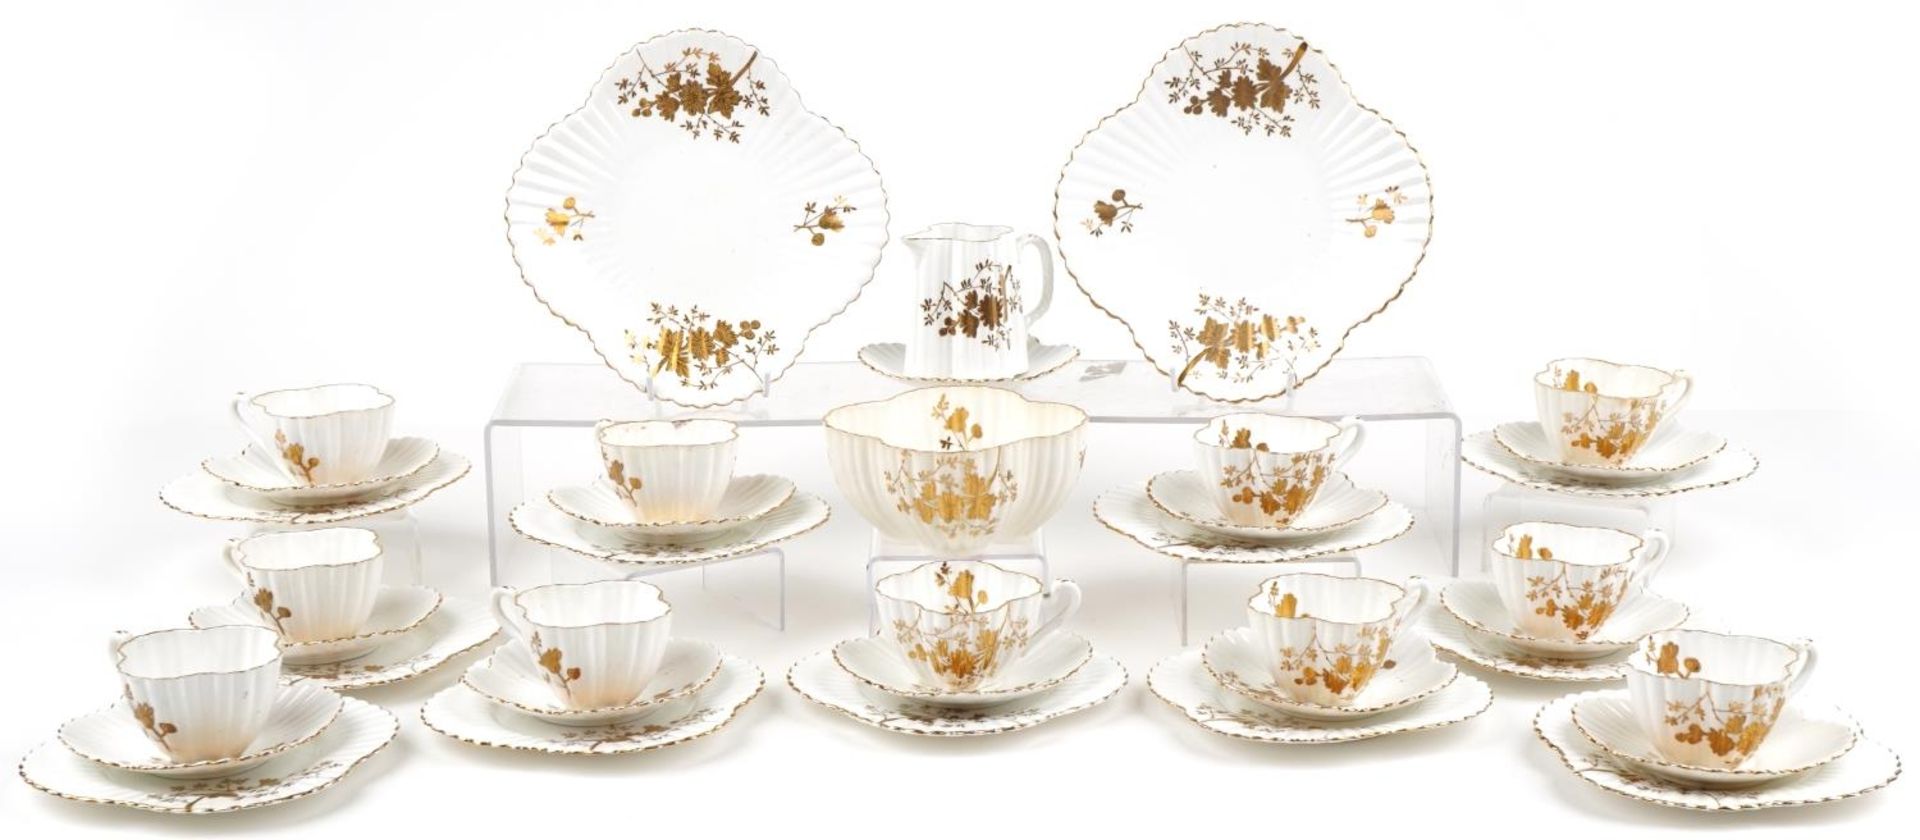 Foley Wileman aesthetic teaware gilded with flowers including trios, milk jug, sugar bowl and side